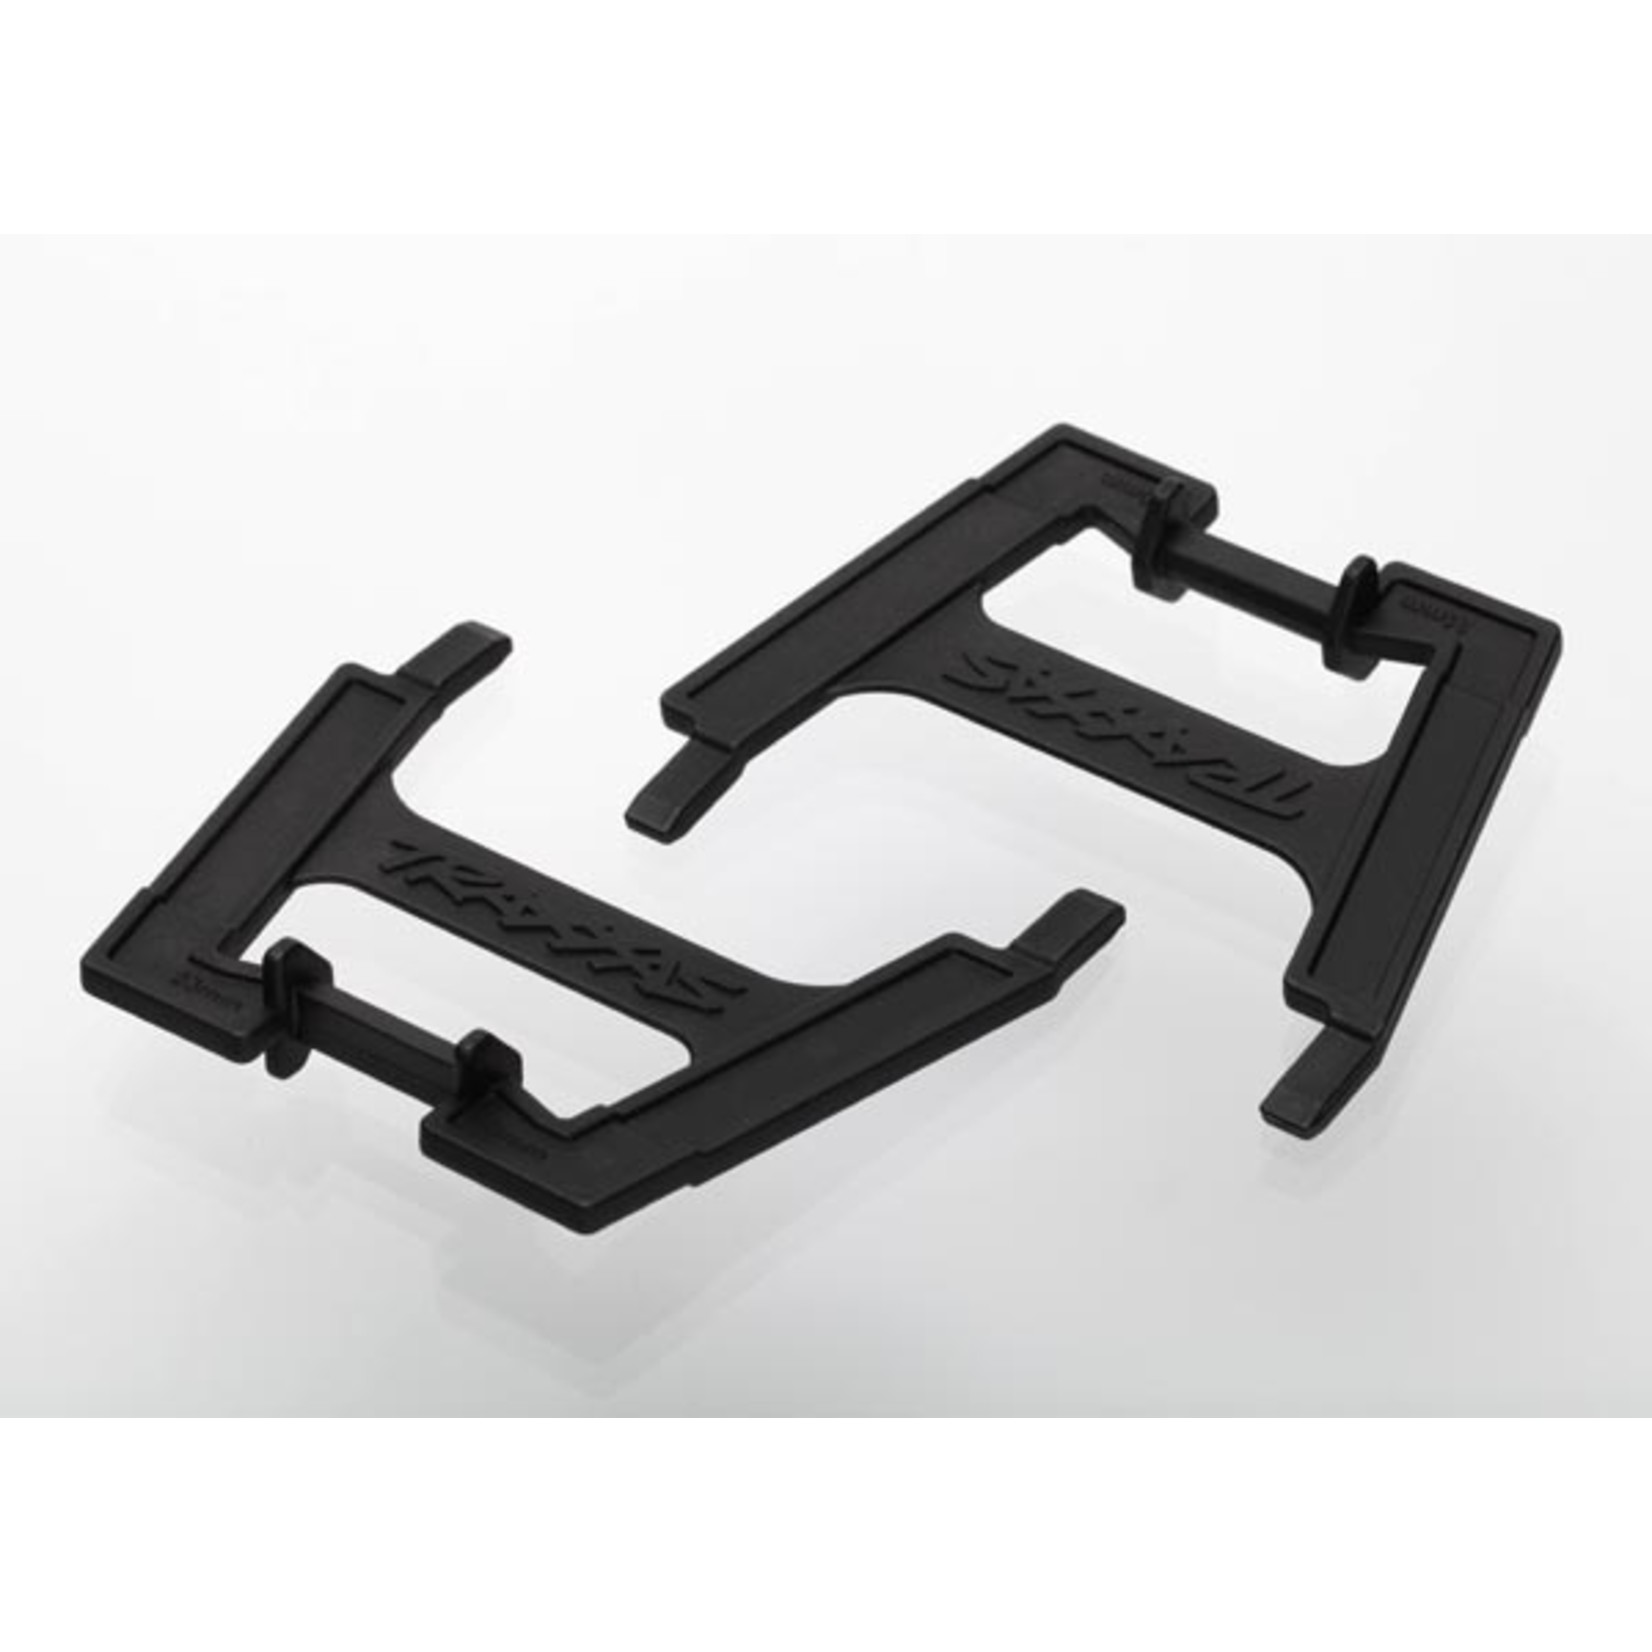 Traxxas 6426 - Battery hold-downs (2)